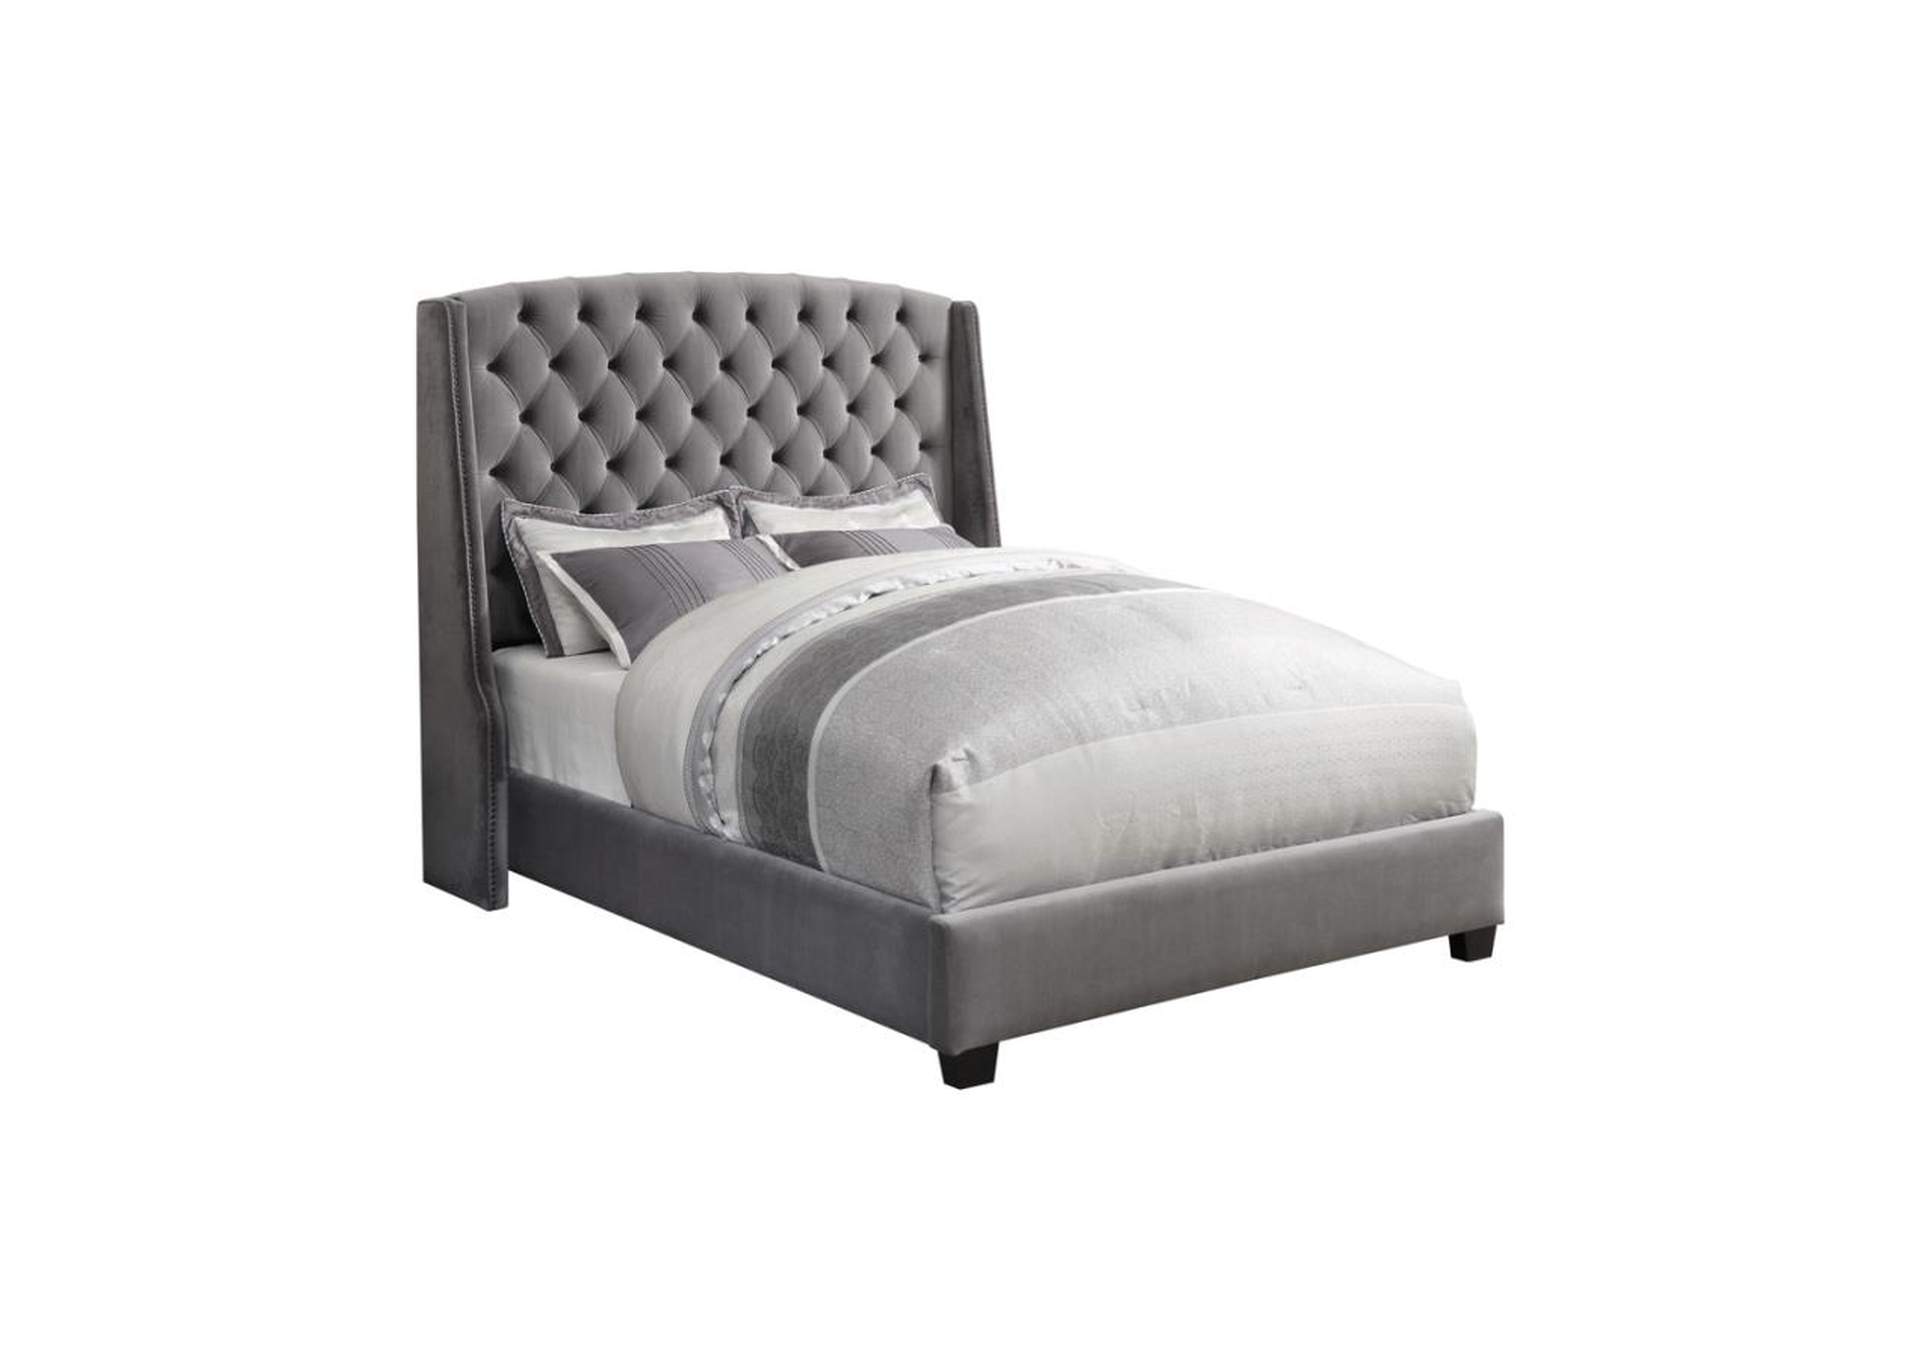 Pissarro Full Tufted Upholstered Bed Grey,Coaster Furniture